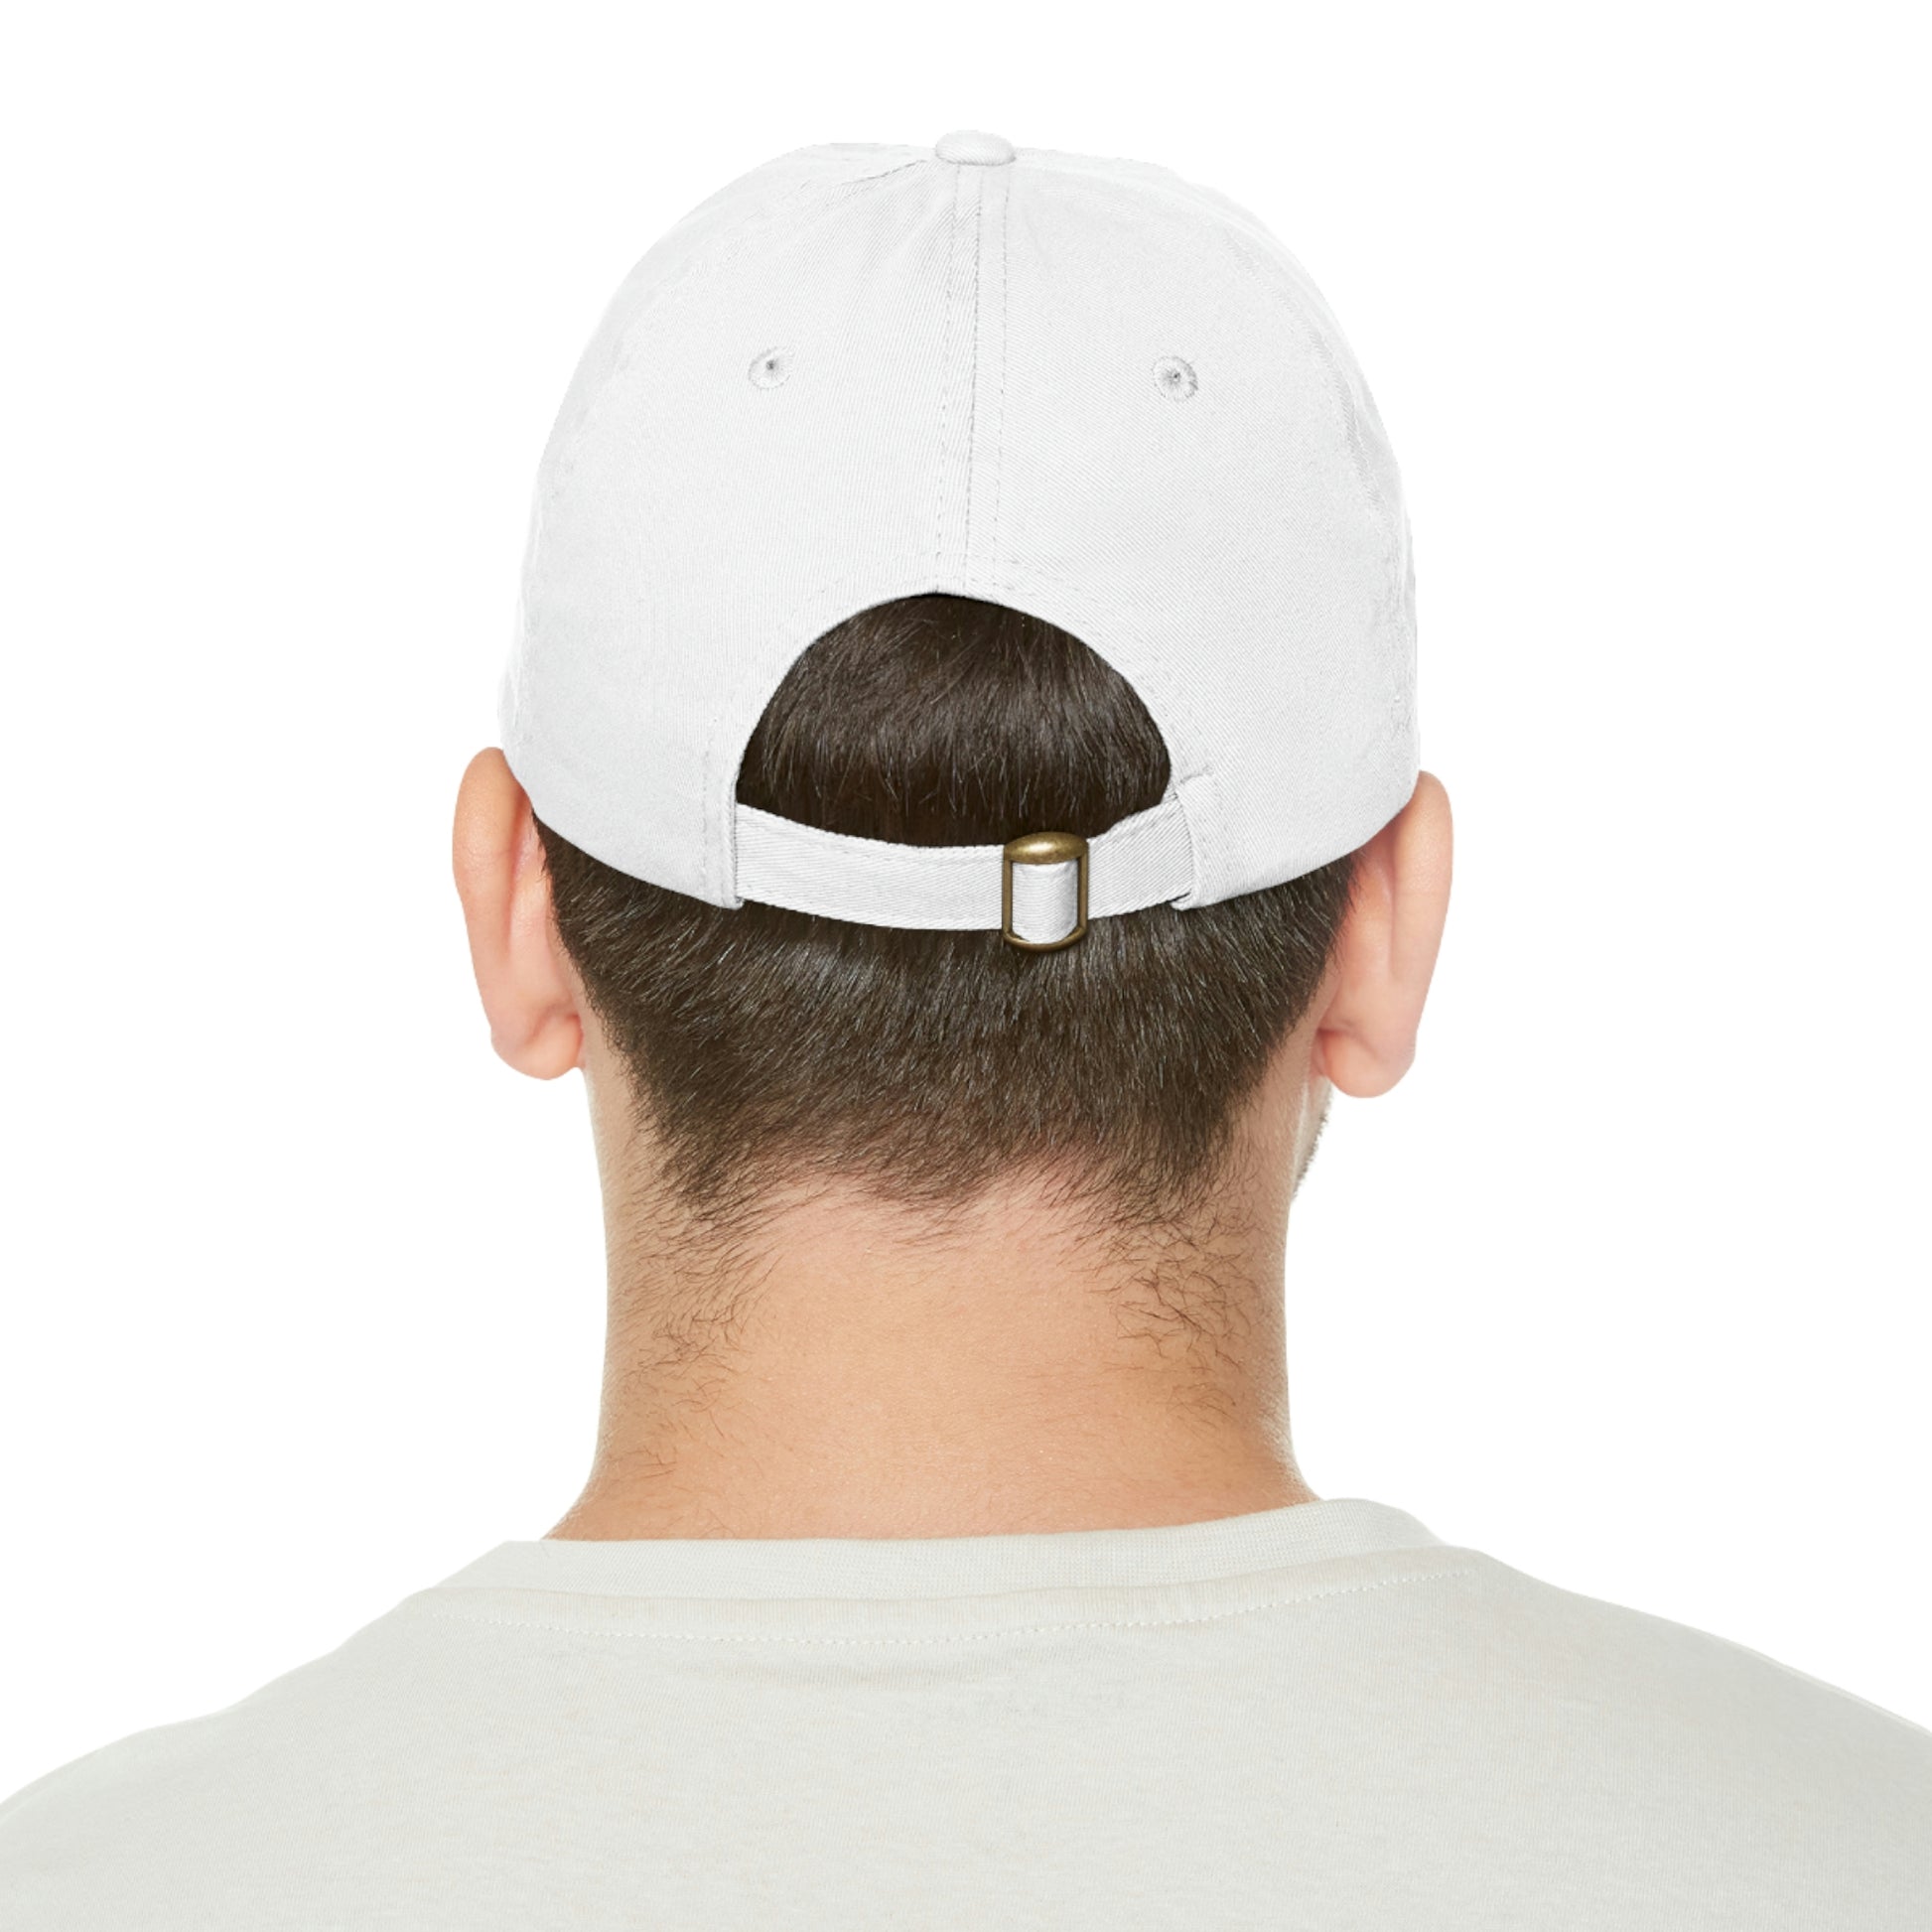 JaxSnap Leather Patch Dad Hat: Classic Comfort Meets Rugged Style for the Ultimate Fishing Cap Printify